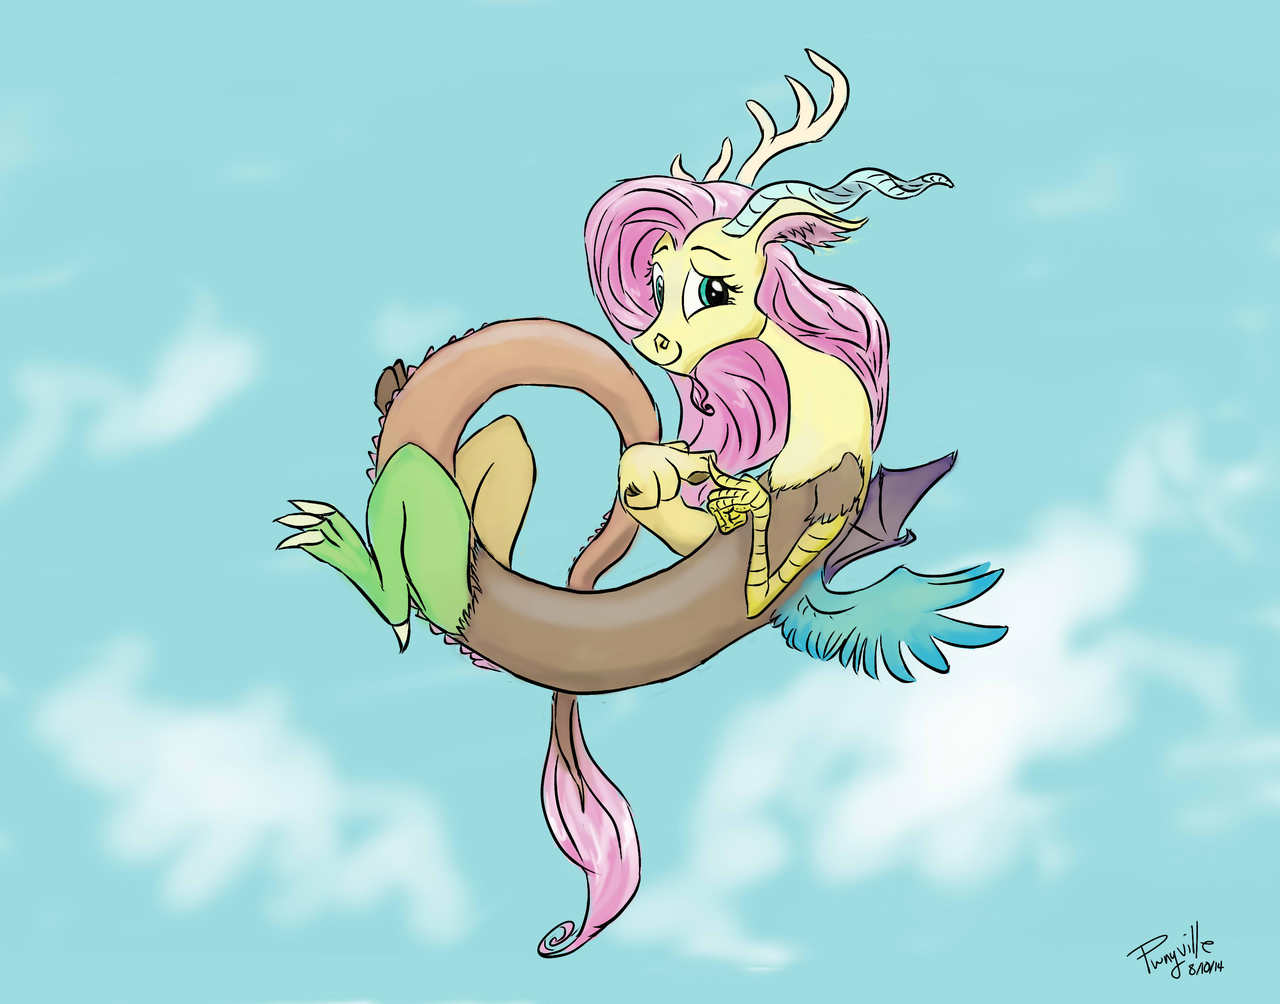 Fillies and gentlecolts, I present to you, Fluttercord.